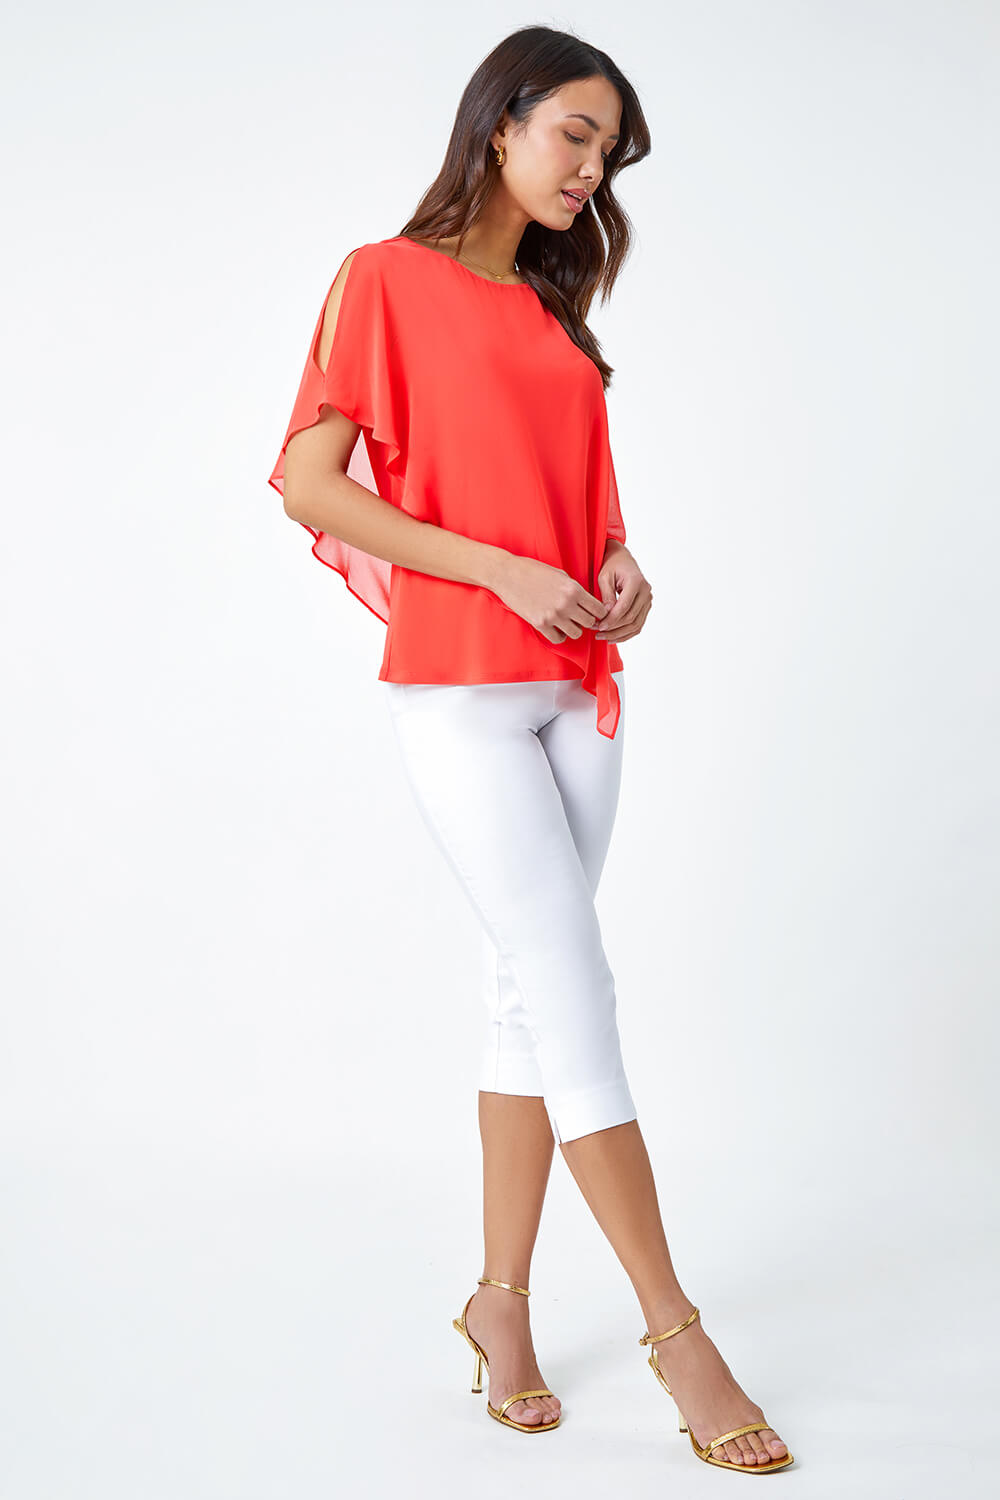 CORAL Asymmetric Cold Shoulder Stretch Top, Image 2 of 5